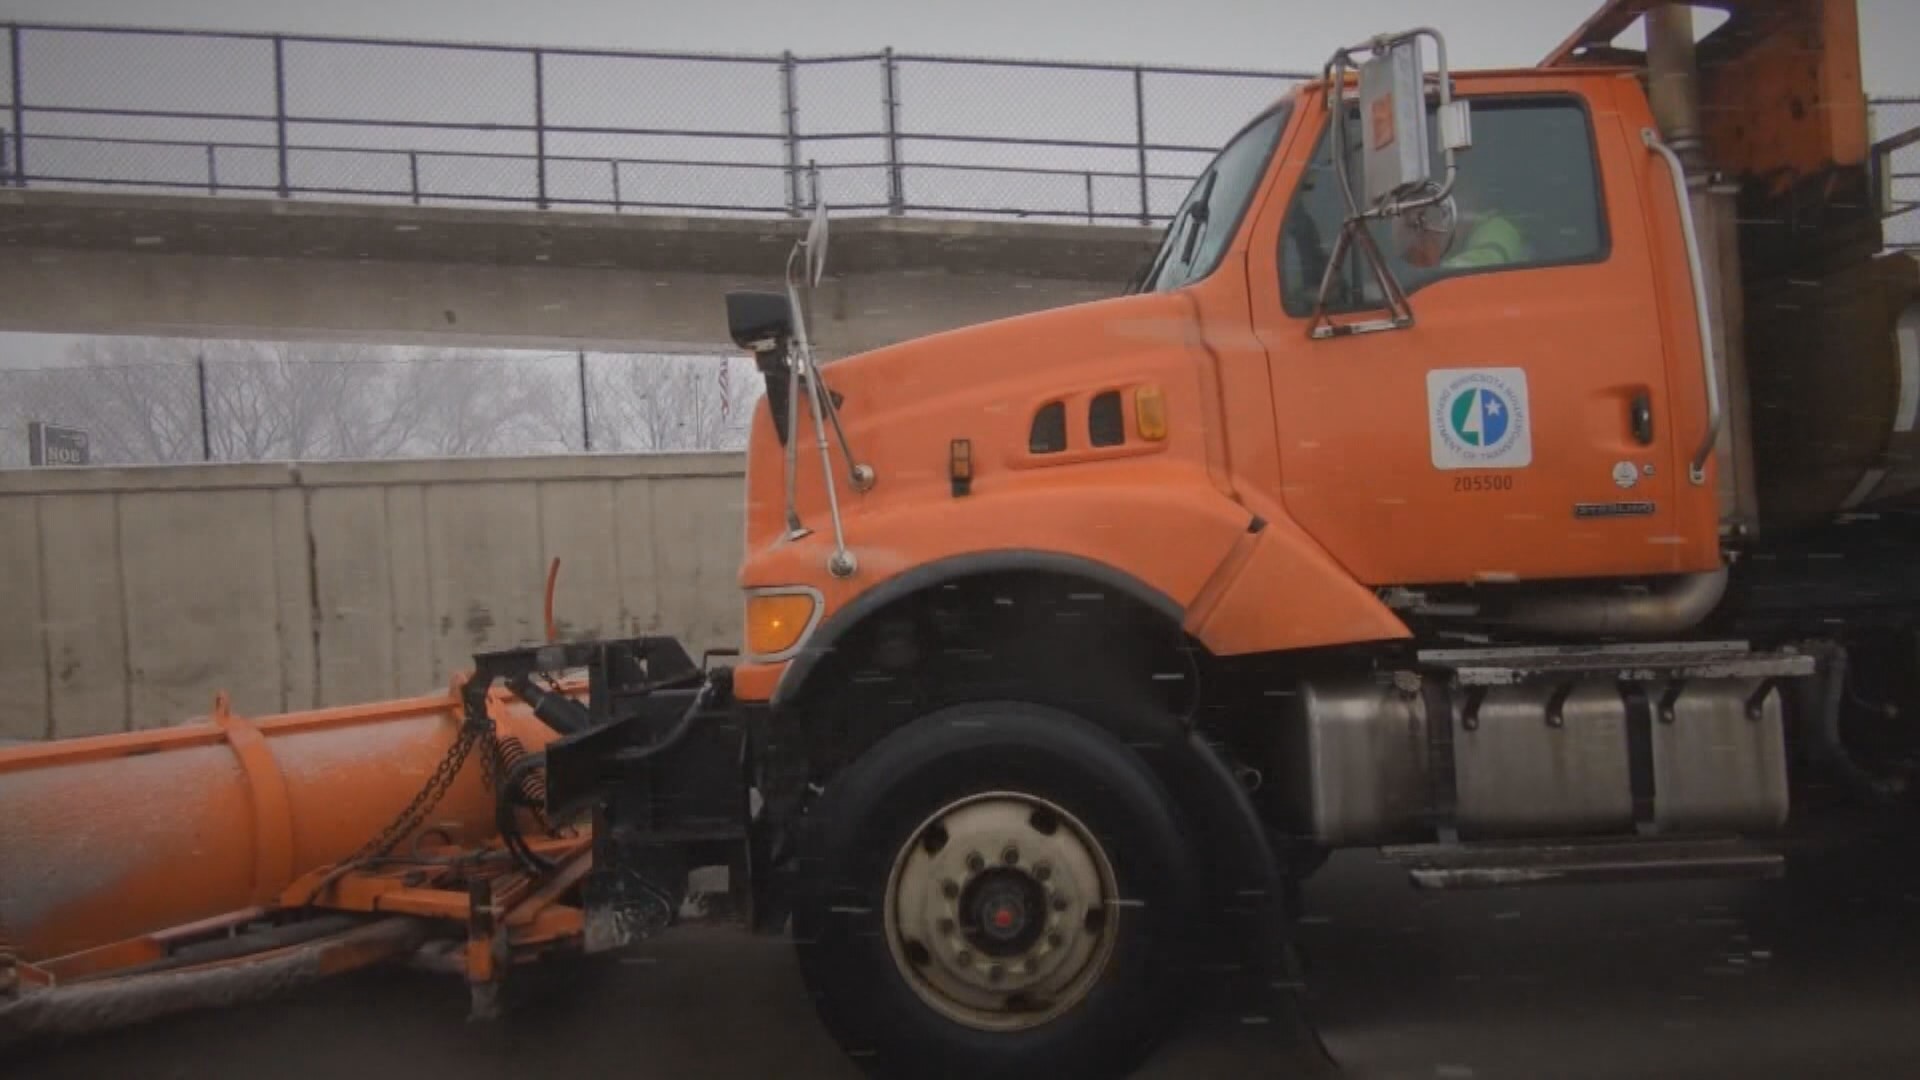 MnDOT announces winners for annual 'Name a Snowplow' contest